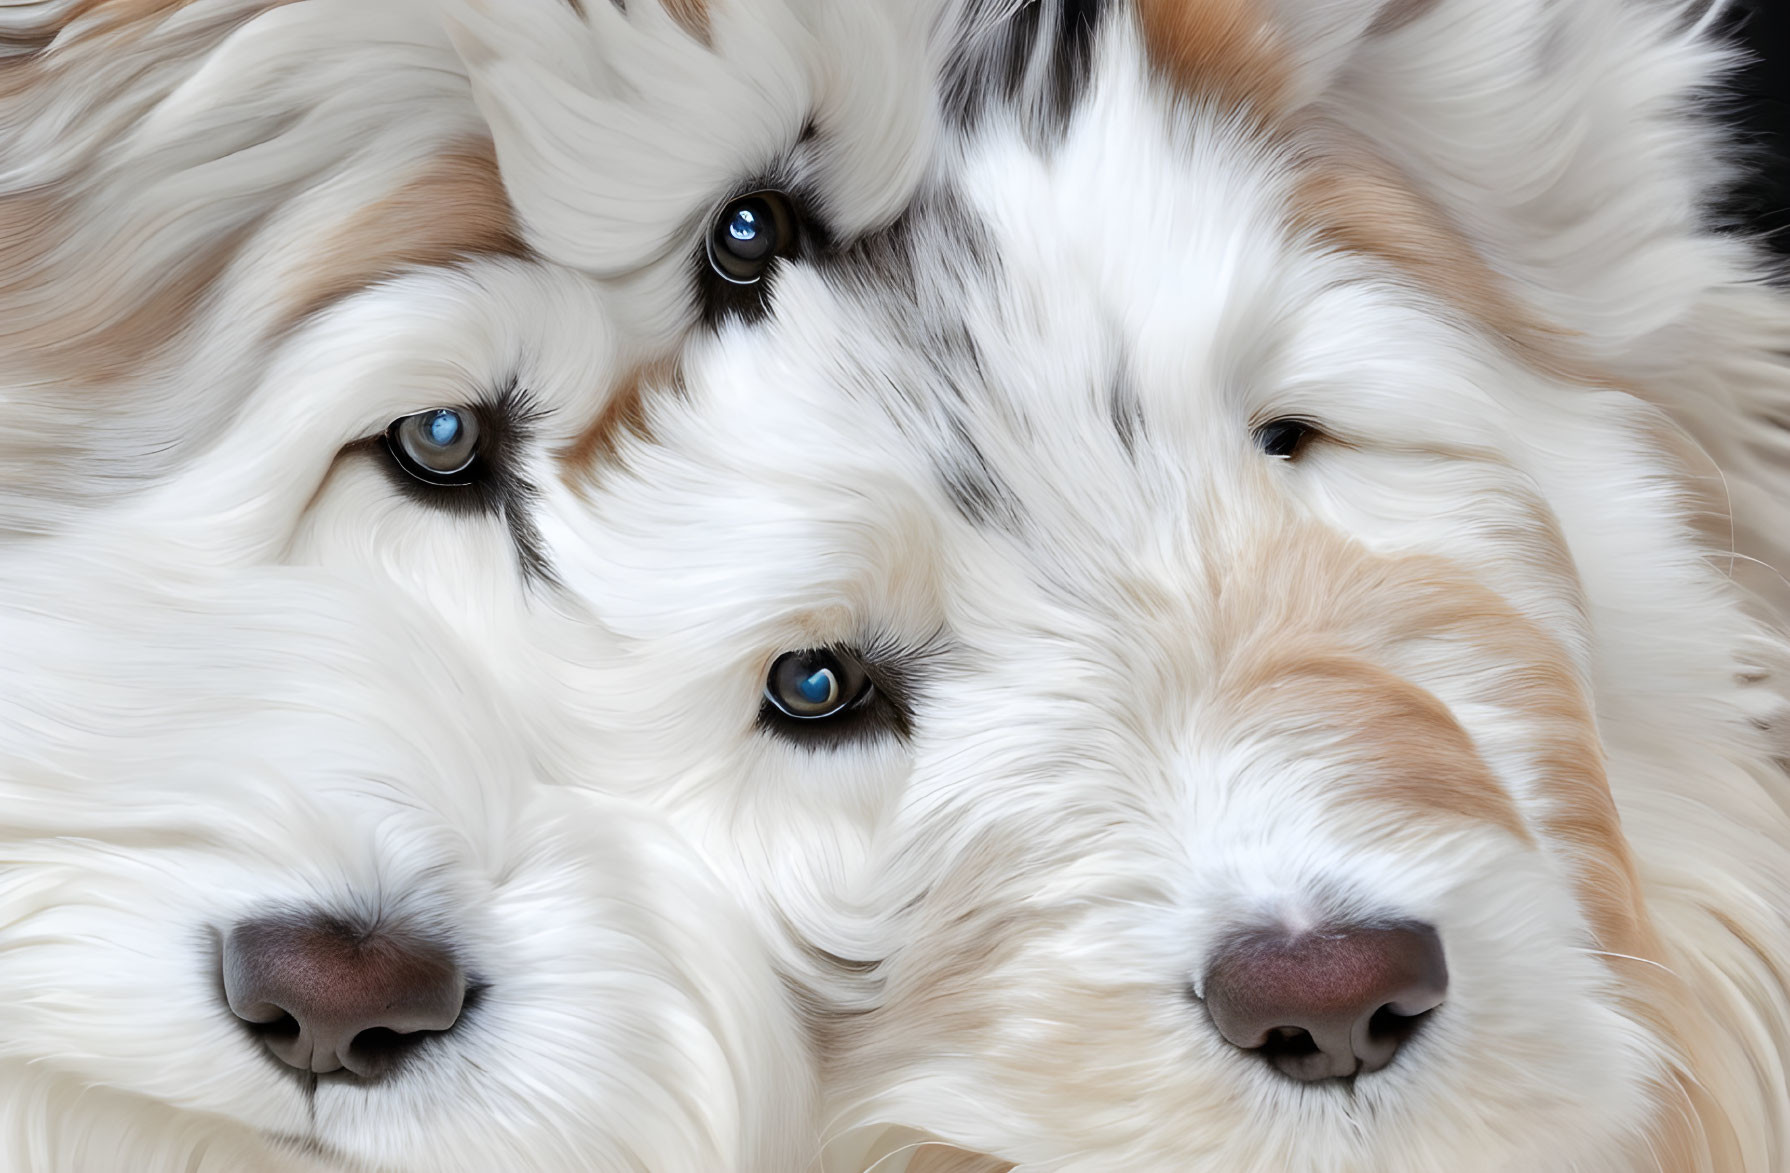 Fluffy Dogs with Blue Eyes and Varied Fur Colors